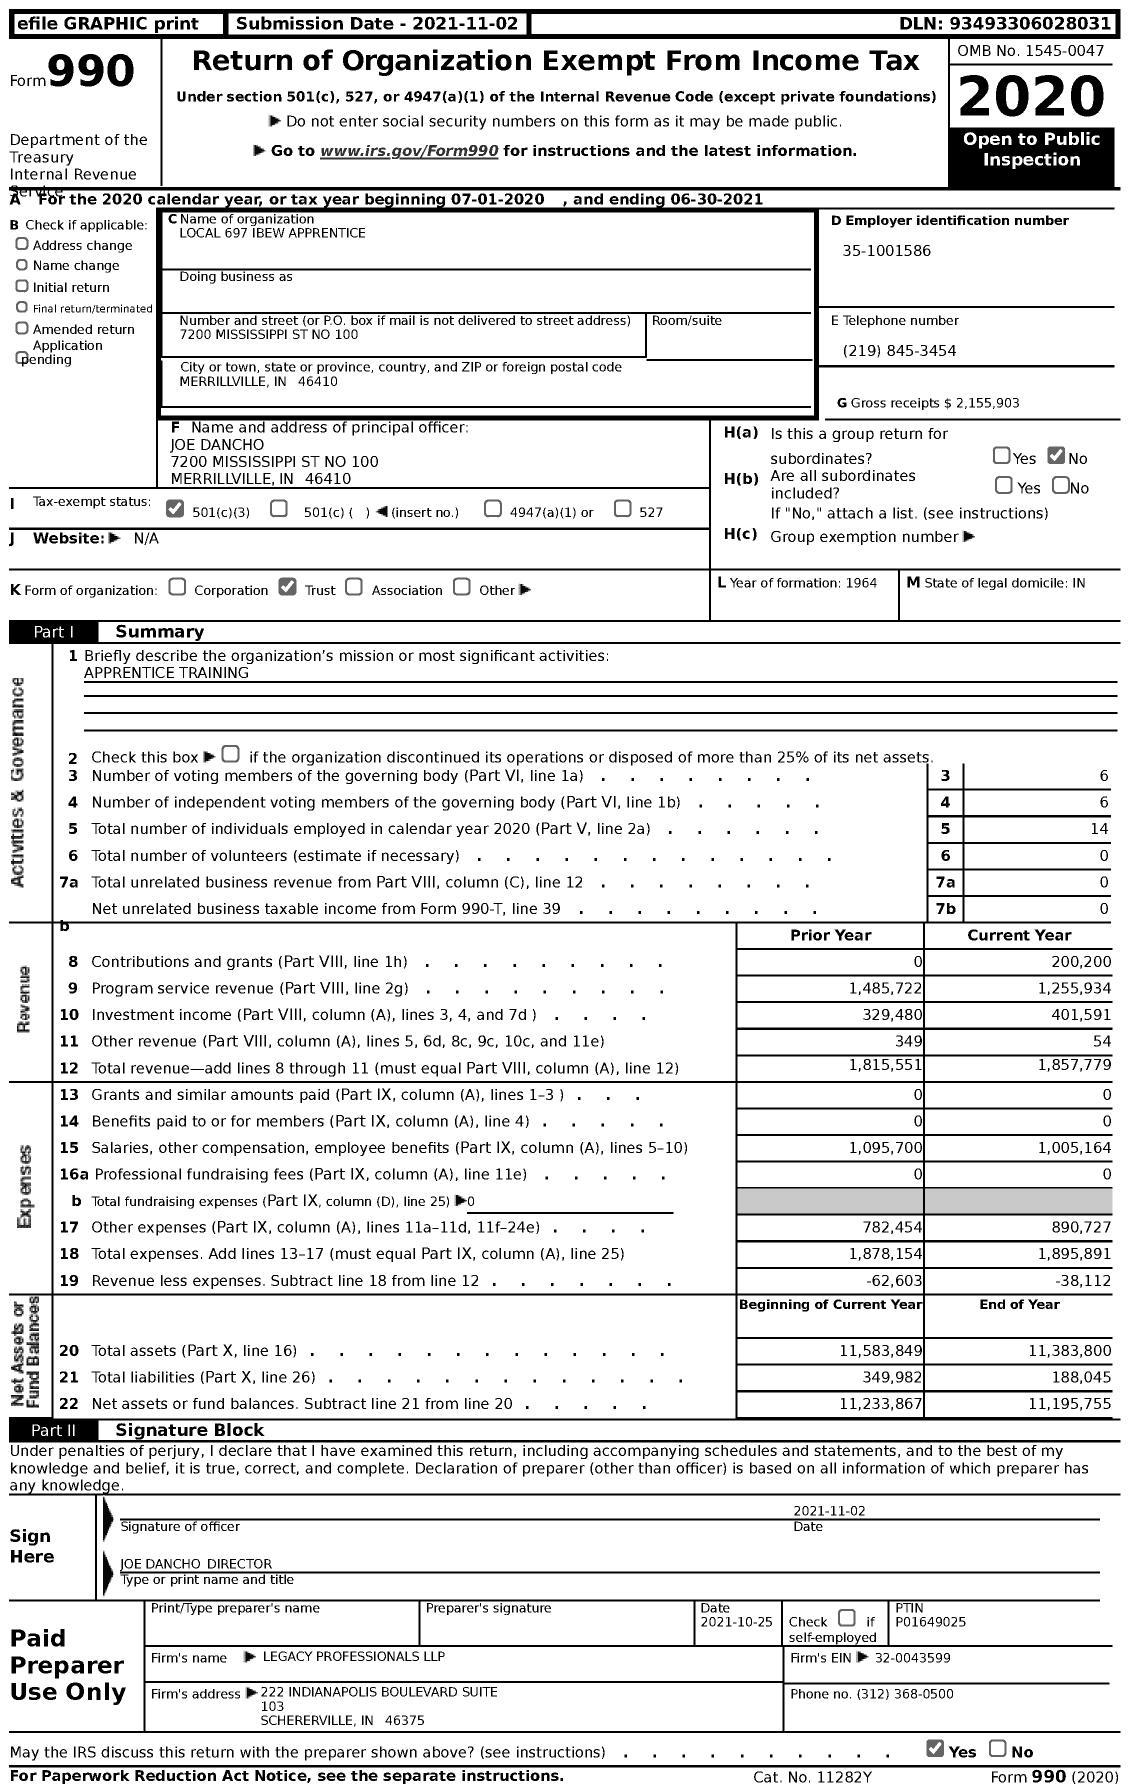 Image of first page of 2020 Form 990 for IBEW Local 697